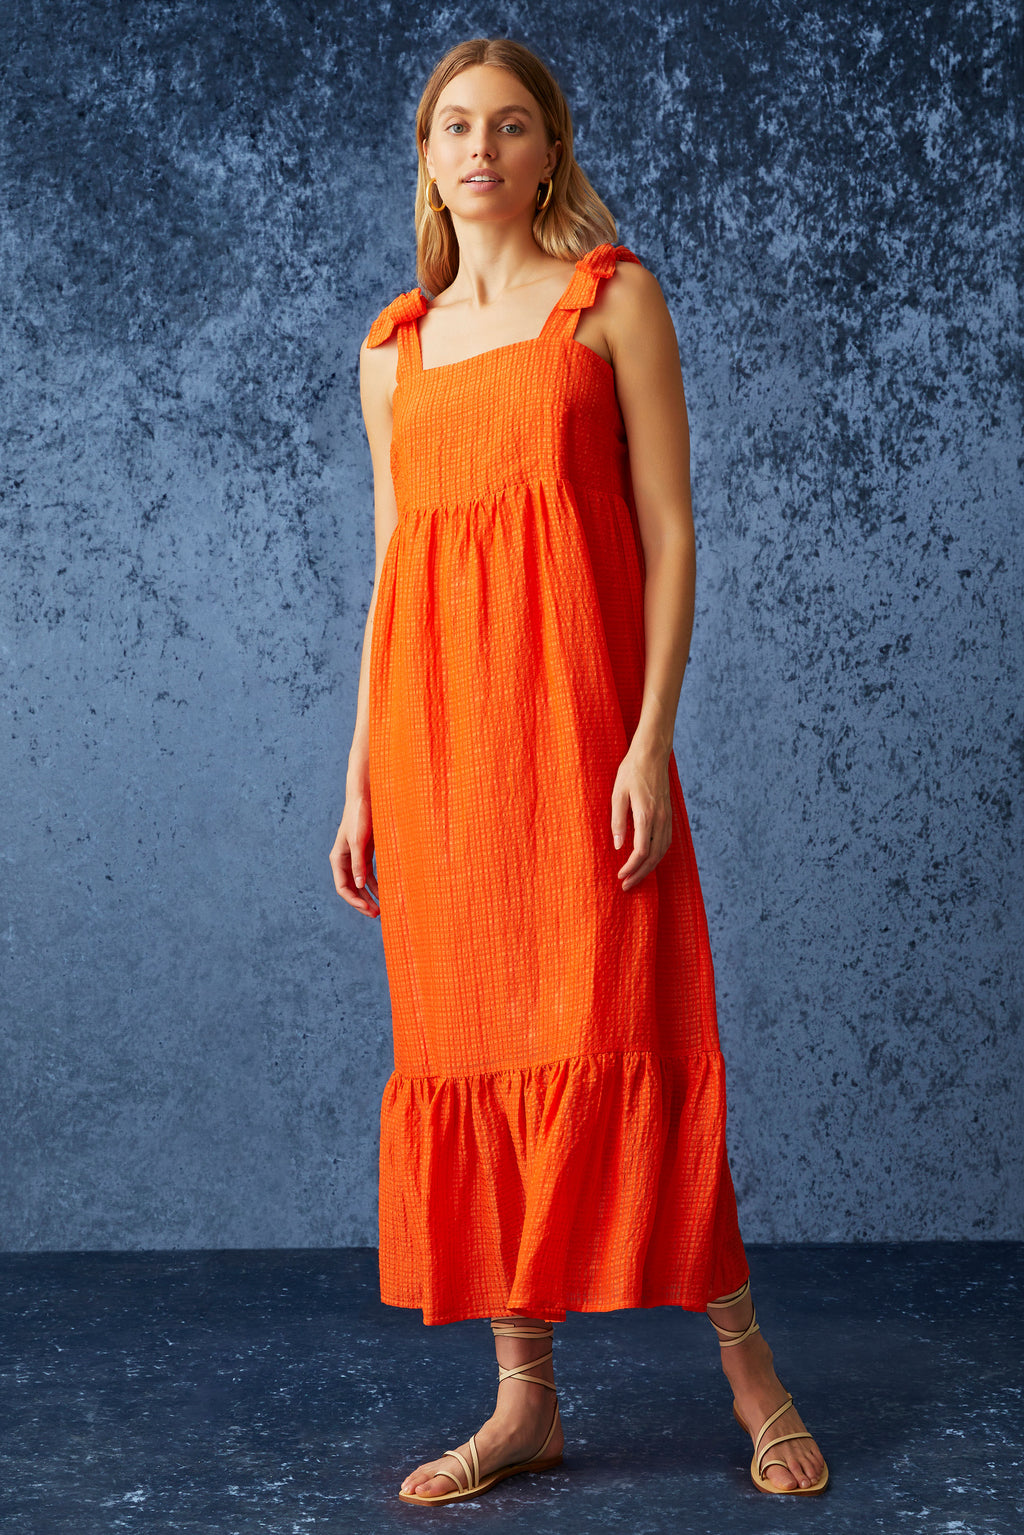 Long dress that is cinched at the waist with long flowy silhouette